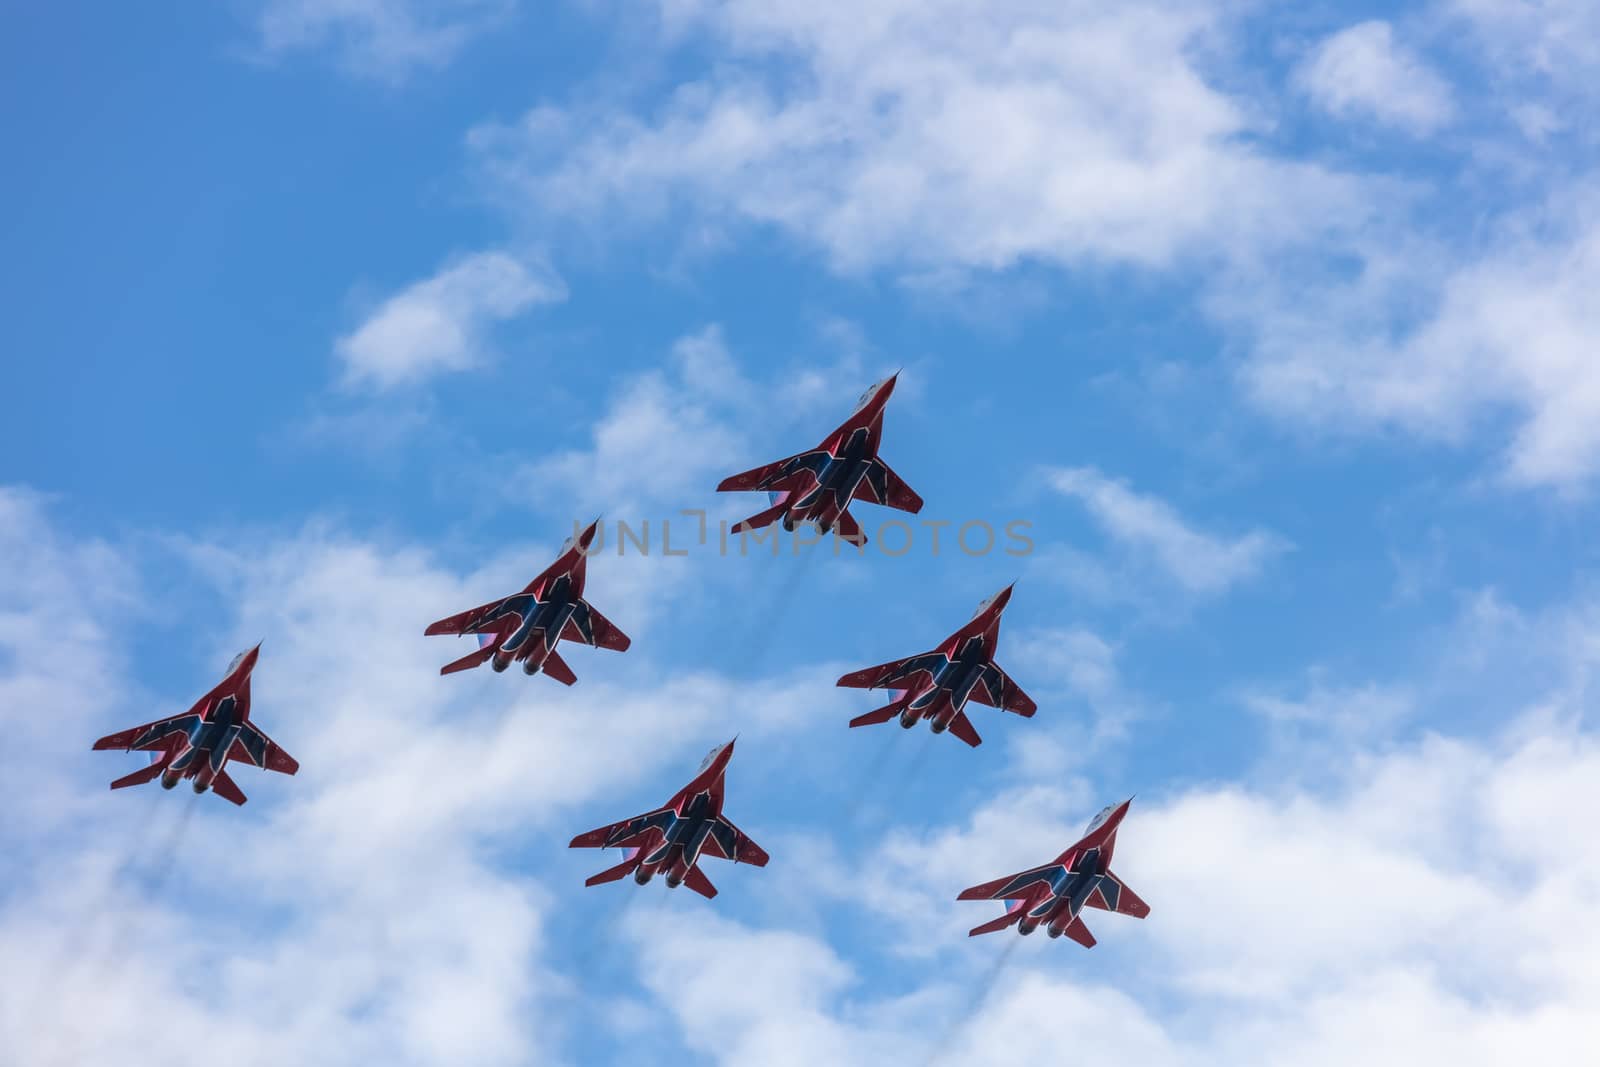 Barnaul, Russia - September 18, 2020: A low angle shot of Strizhi MiG-29 fighter jet squadron performing stunts during an aeroshow. Blue cloudy sky as a background.